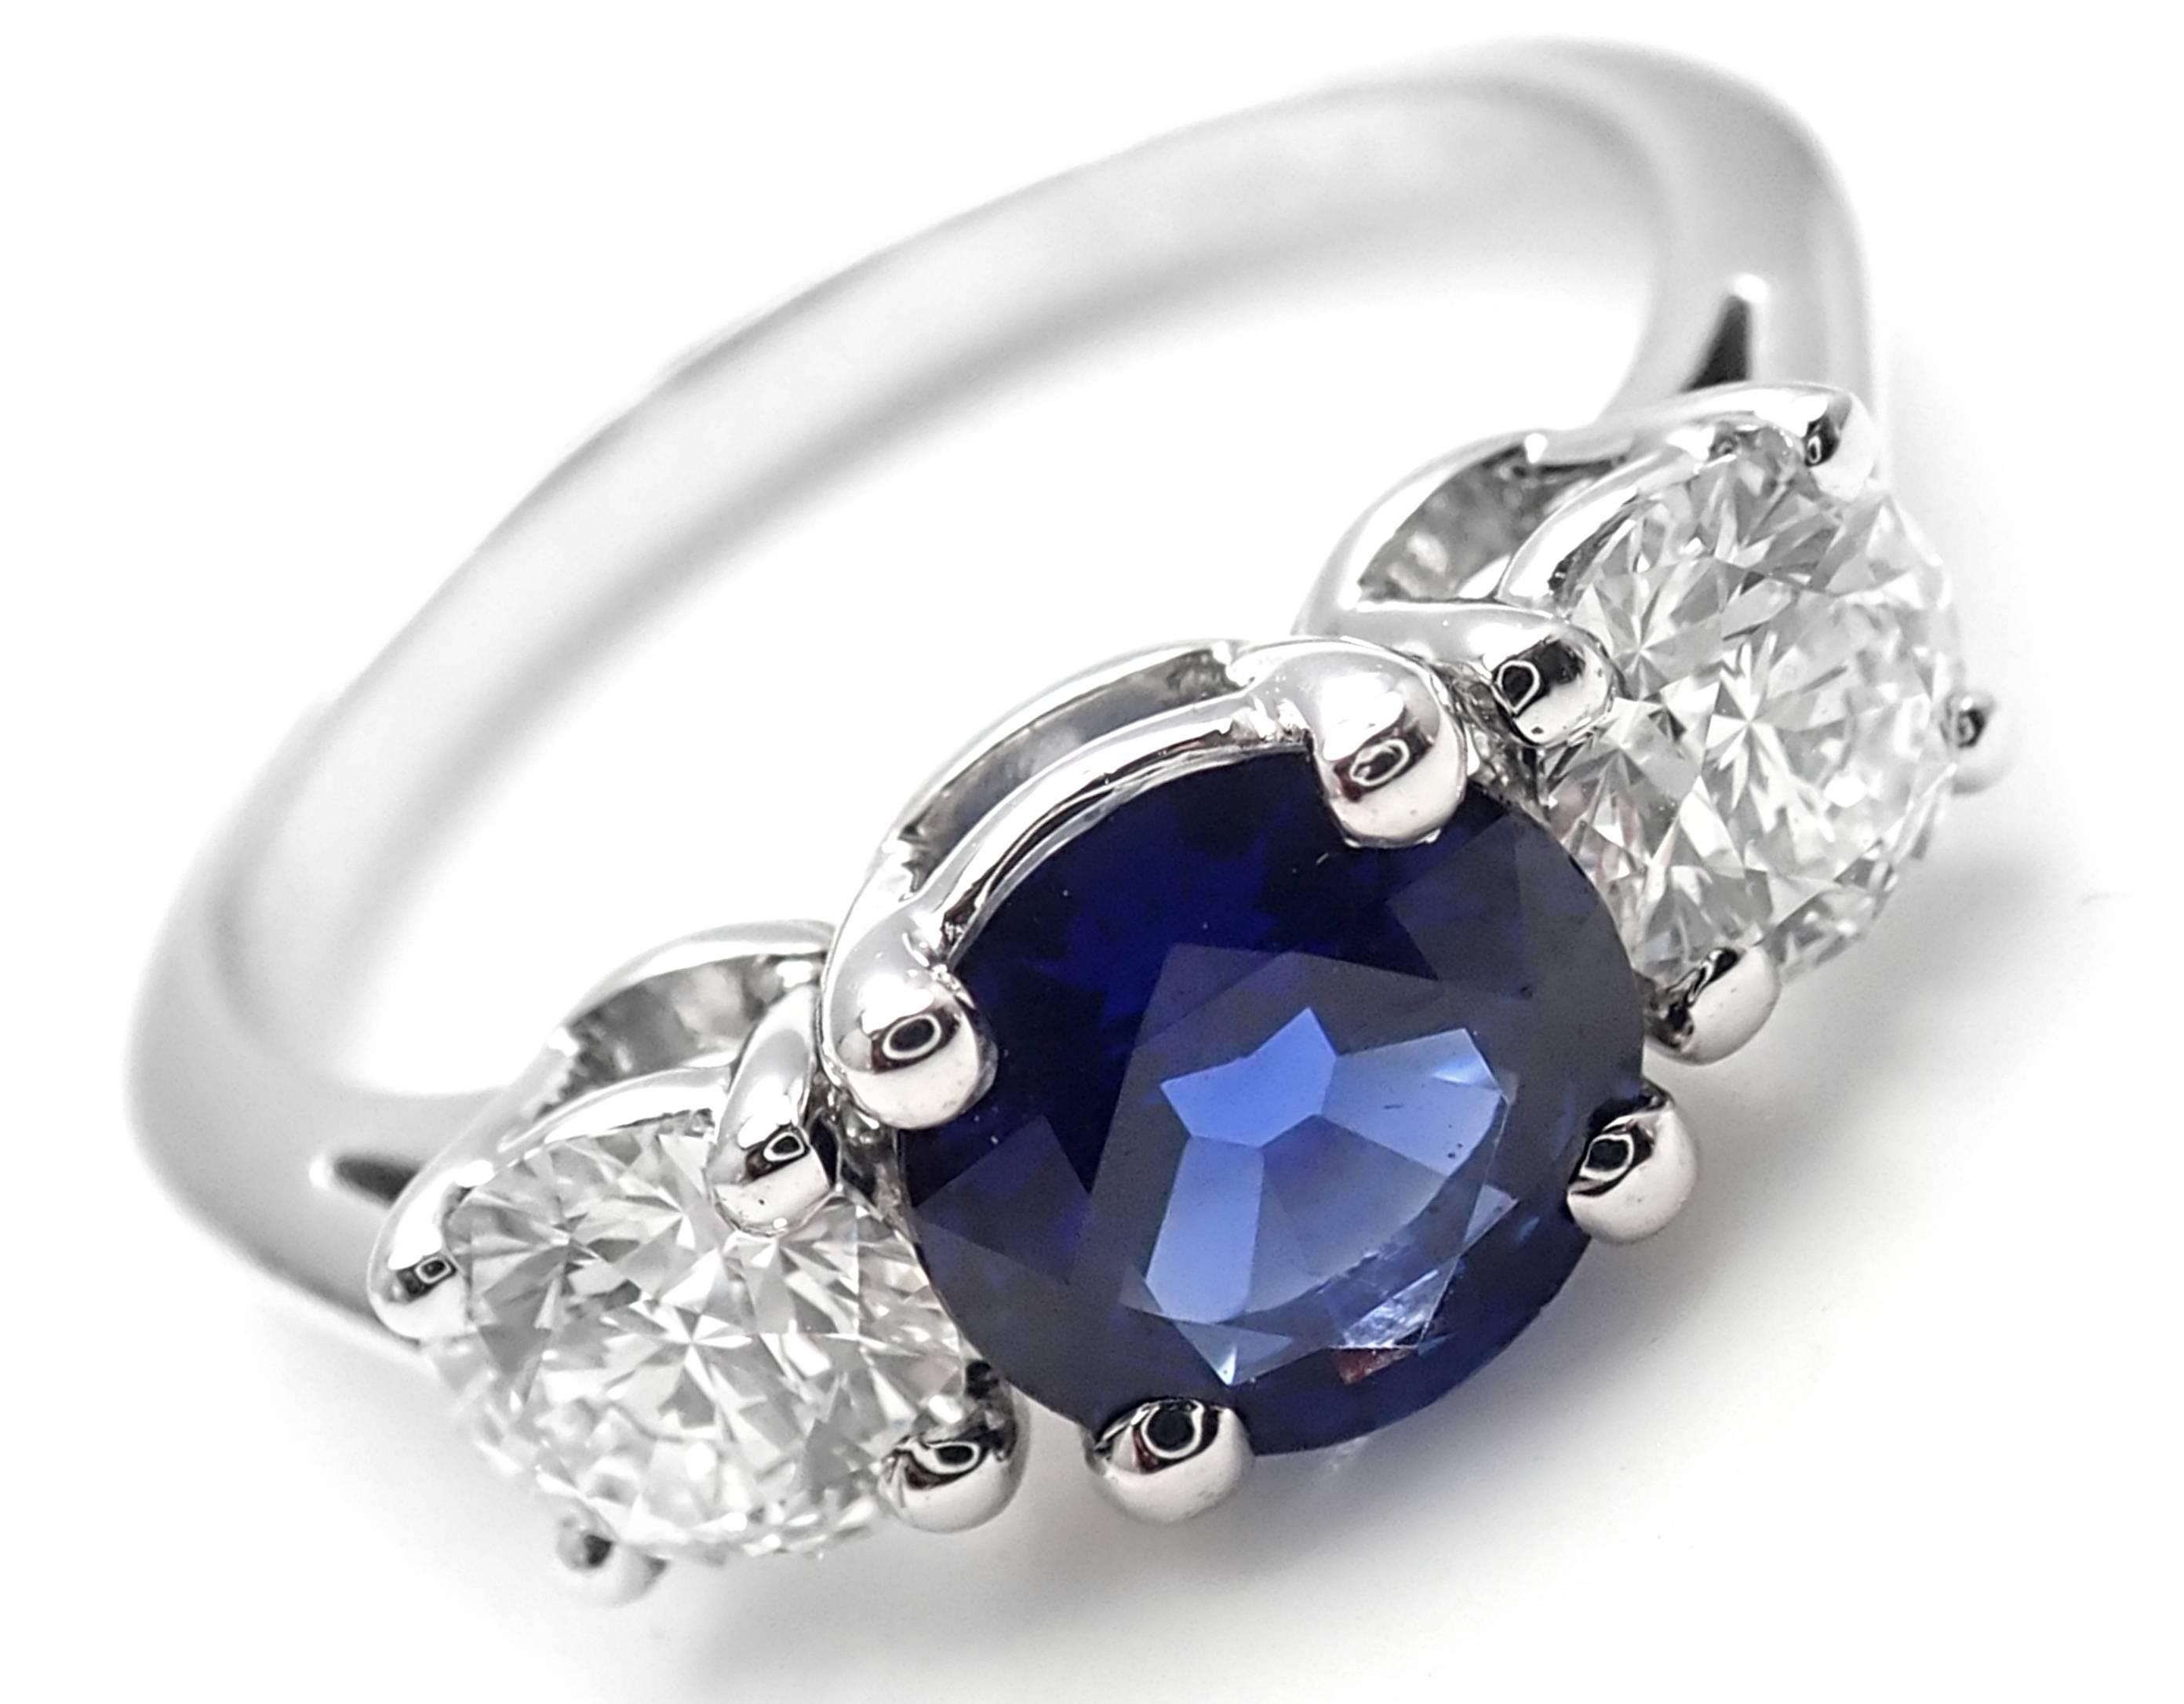 Platinum Diamond And Sapphire Three Stone Band Ring by Tiffany & Co. 
With 2 Round Brilliant Cut Diamonds VS1 clarity, G color, Total weight Approx .82ct
1 round sapphire total weight approx. 1.03ct
Details:
Ring Size: 6
Width: 6mm
Weight: 5